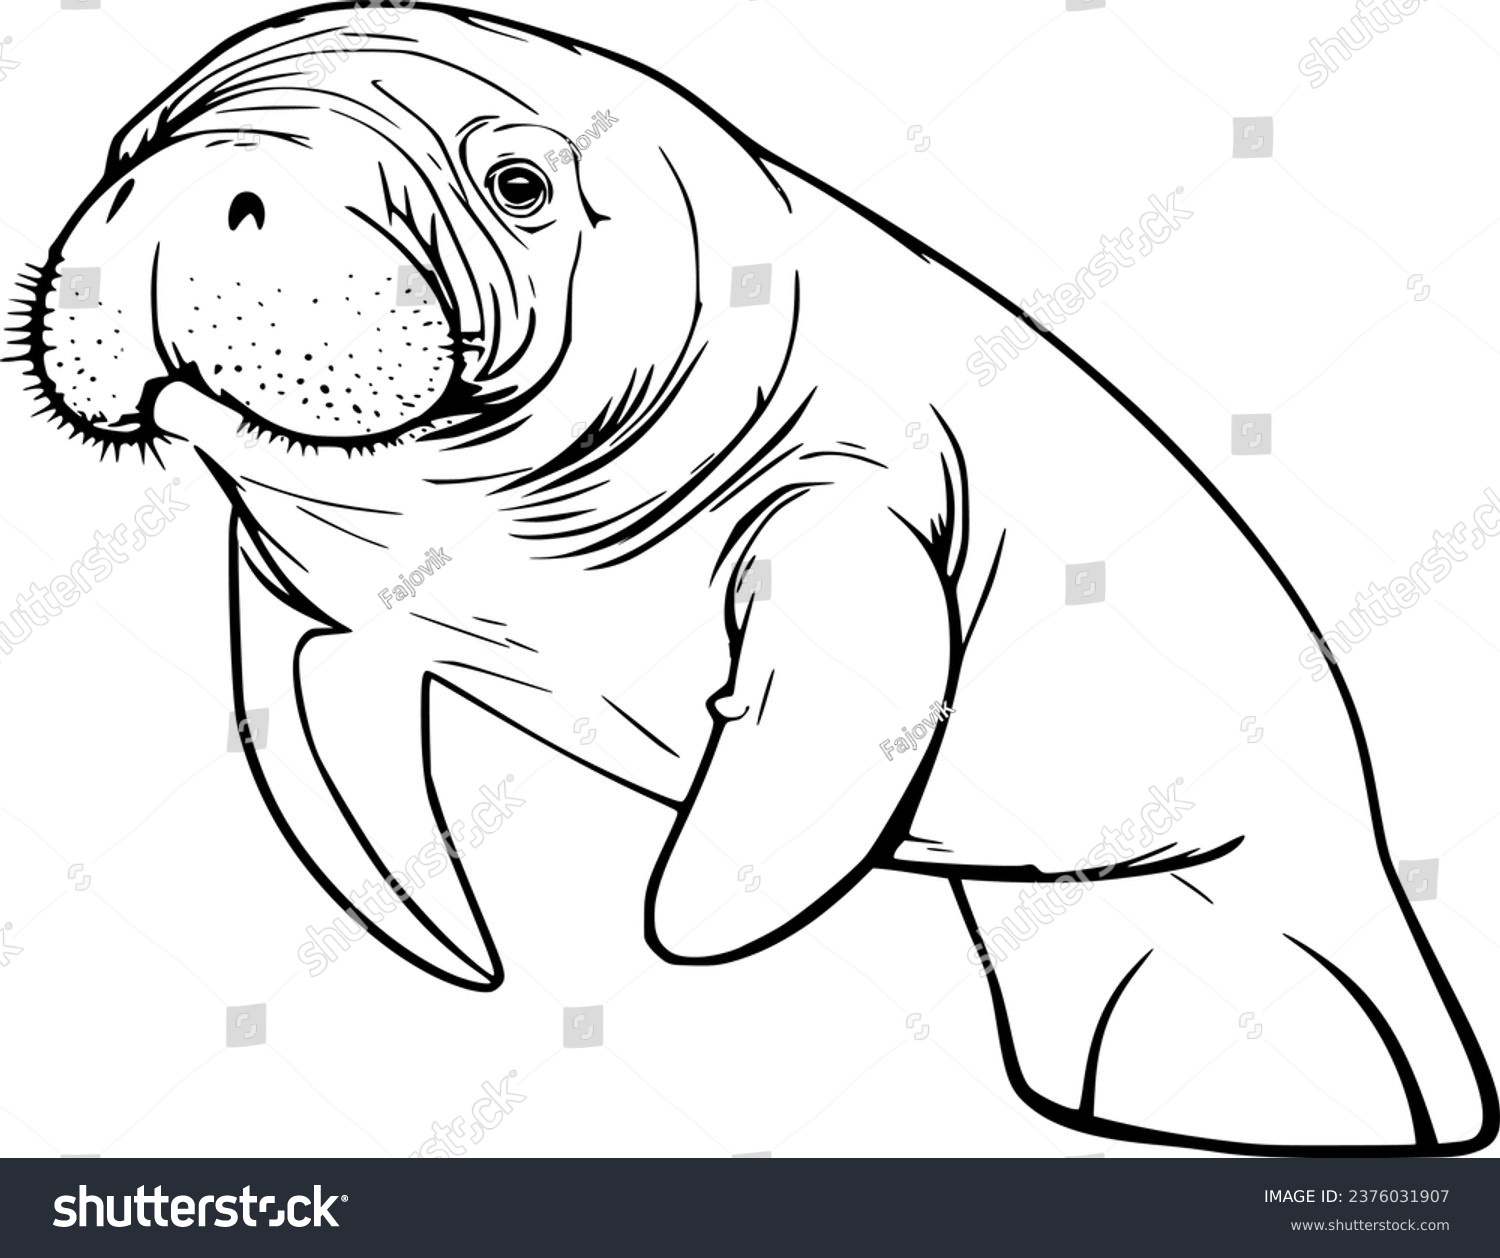 SVG of Manatee Realistic Animal Hand Drawn Illustration Vector For Coloring Book svg